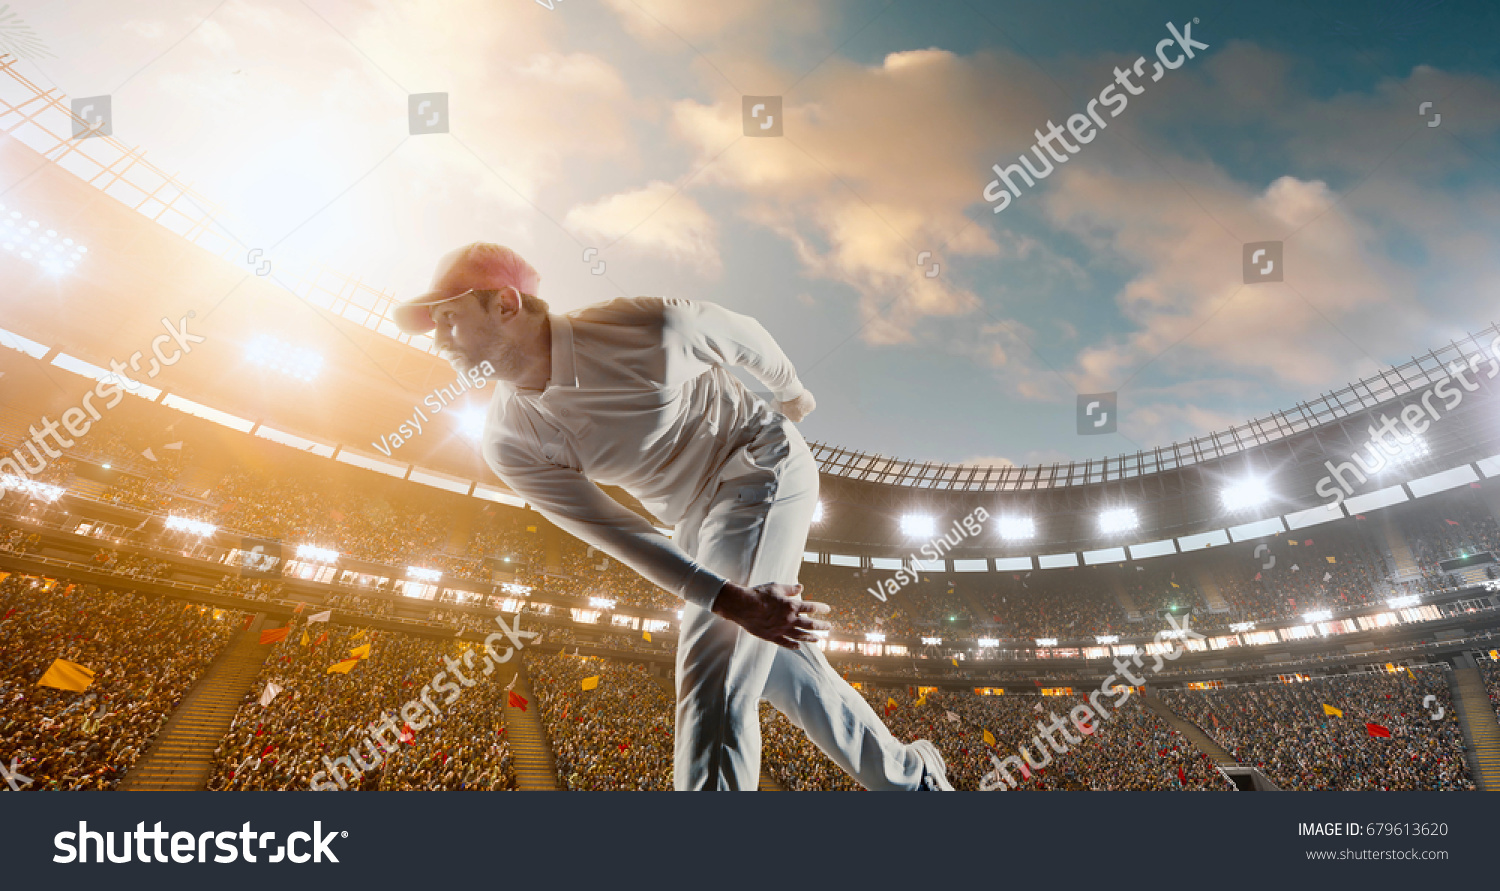 Cricket bowler in action on a professional stadium. The player wears unbranded clothes. The stadium is made in 3D. #679613620